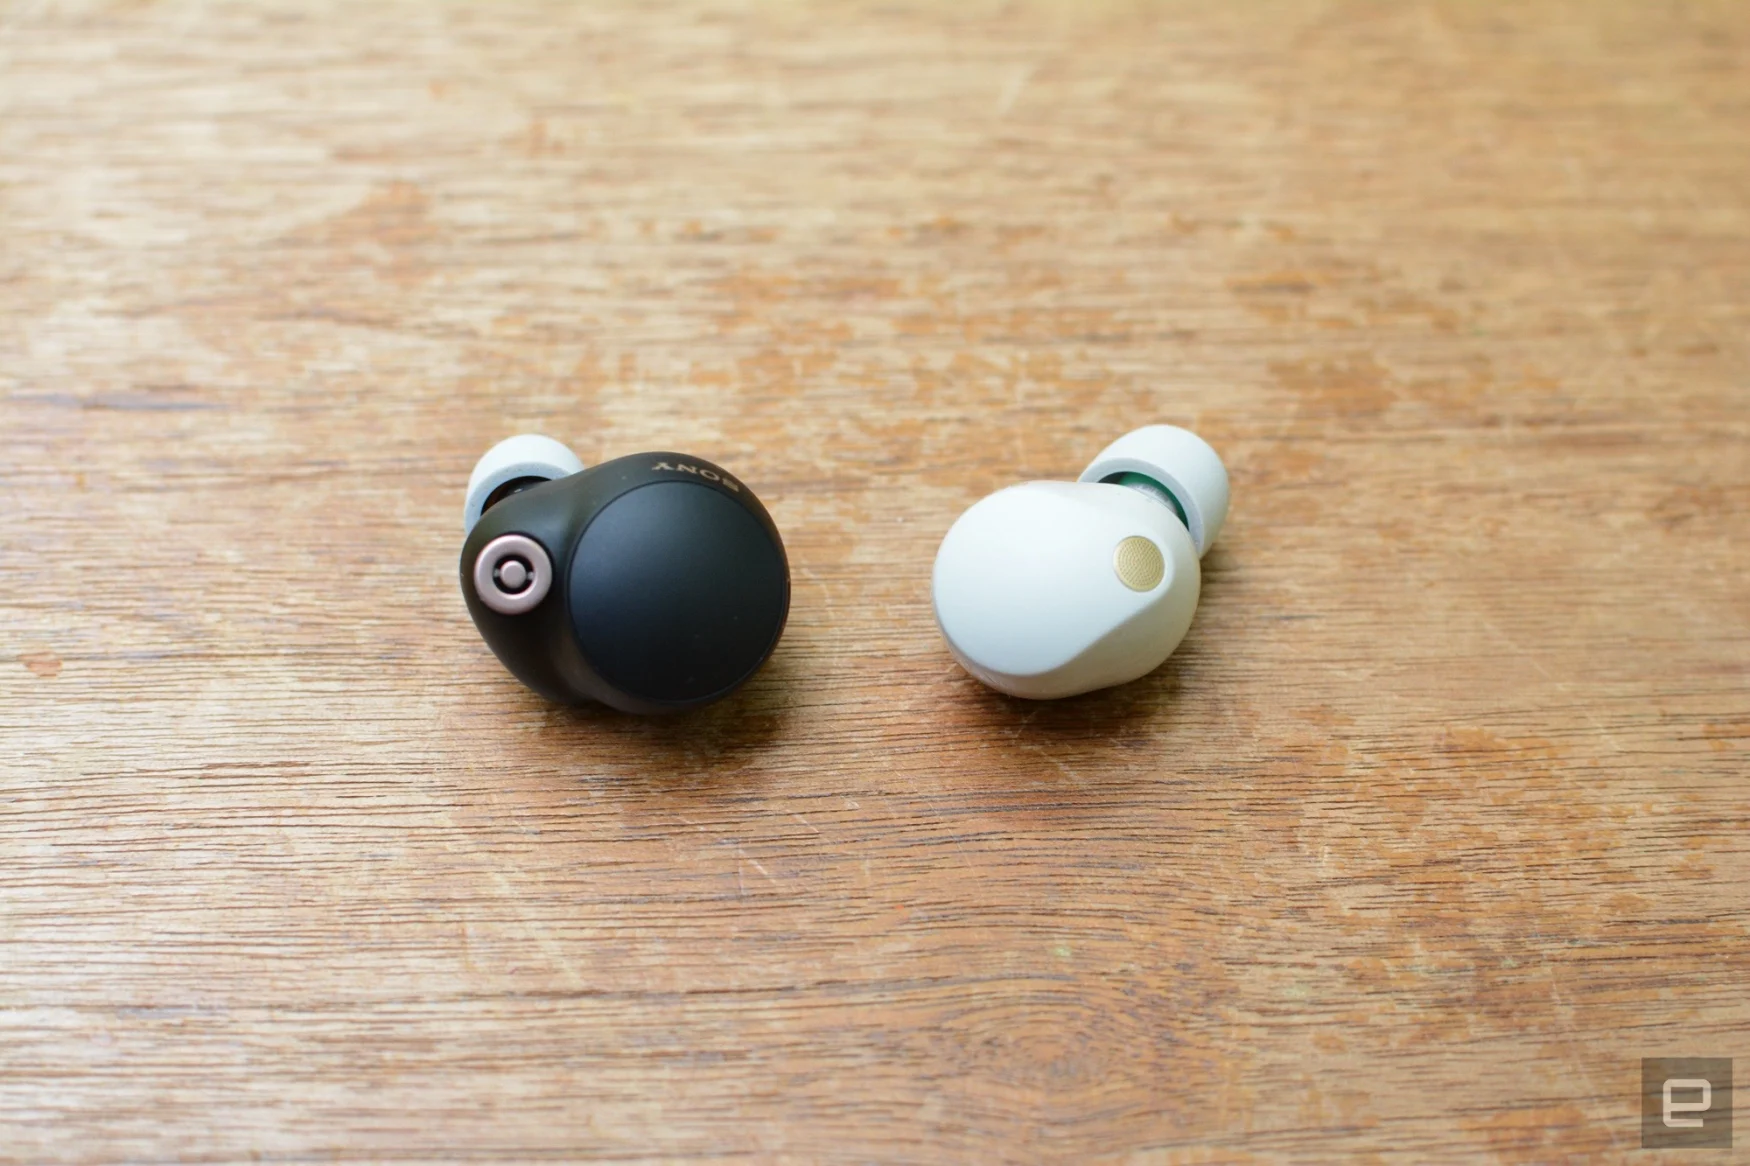 Sony WF-1000XM5 earbuds review: Striving for perfection | Engadget